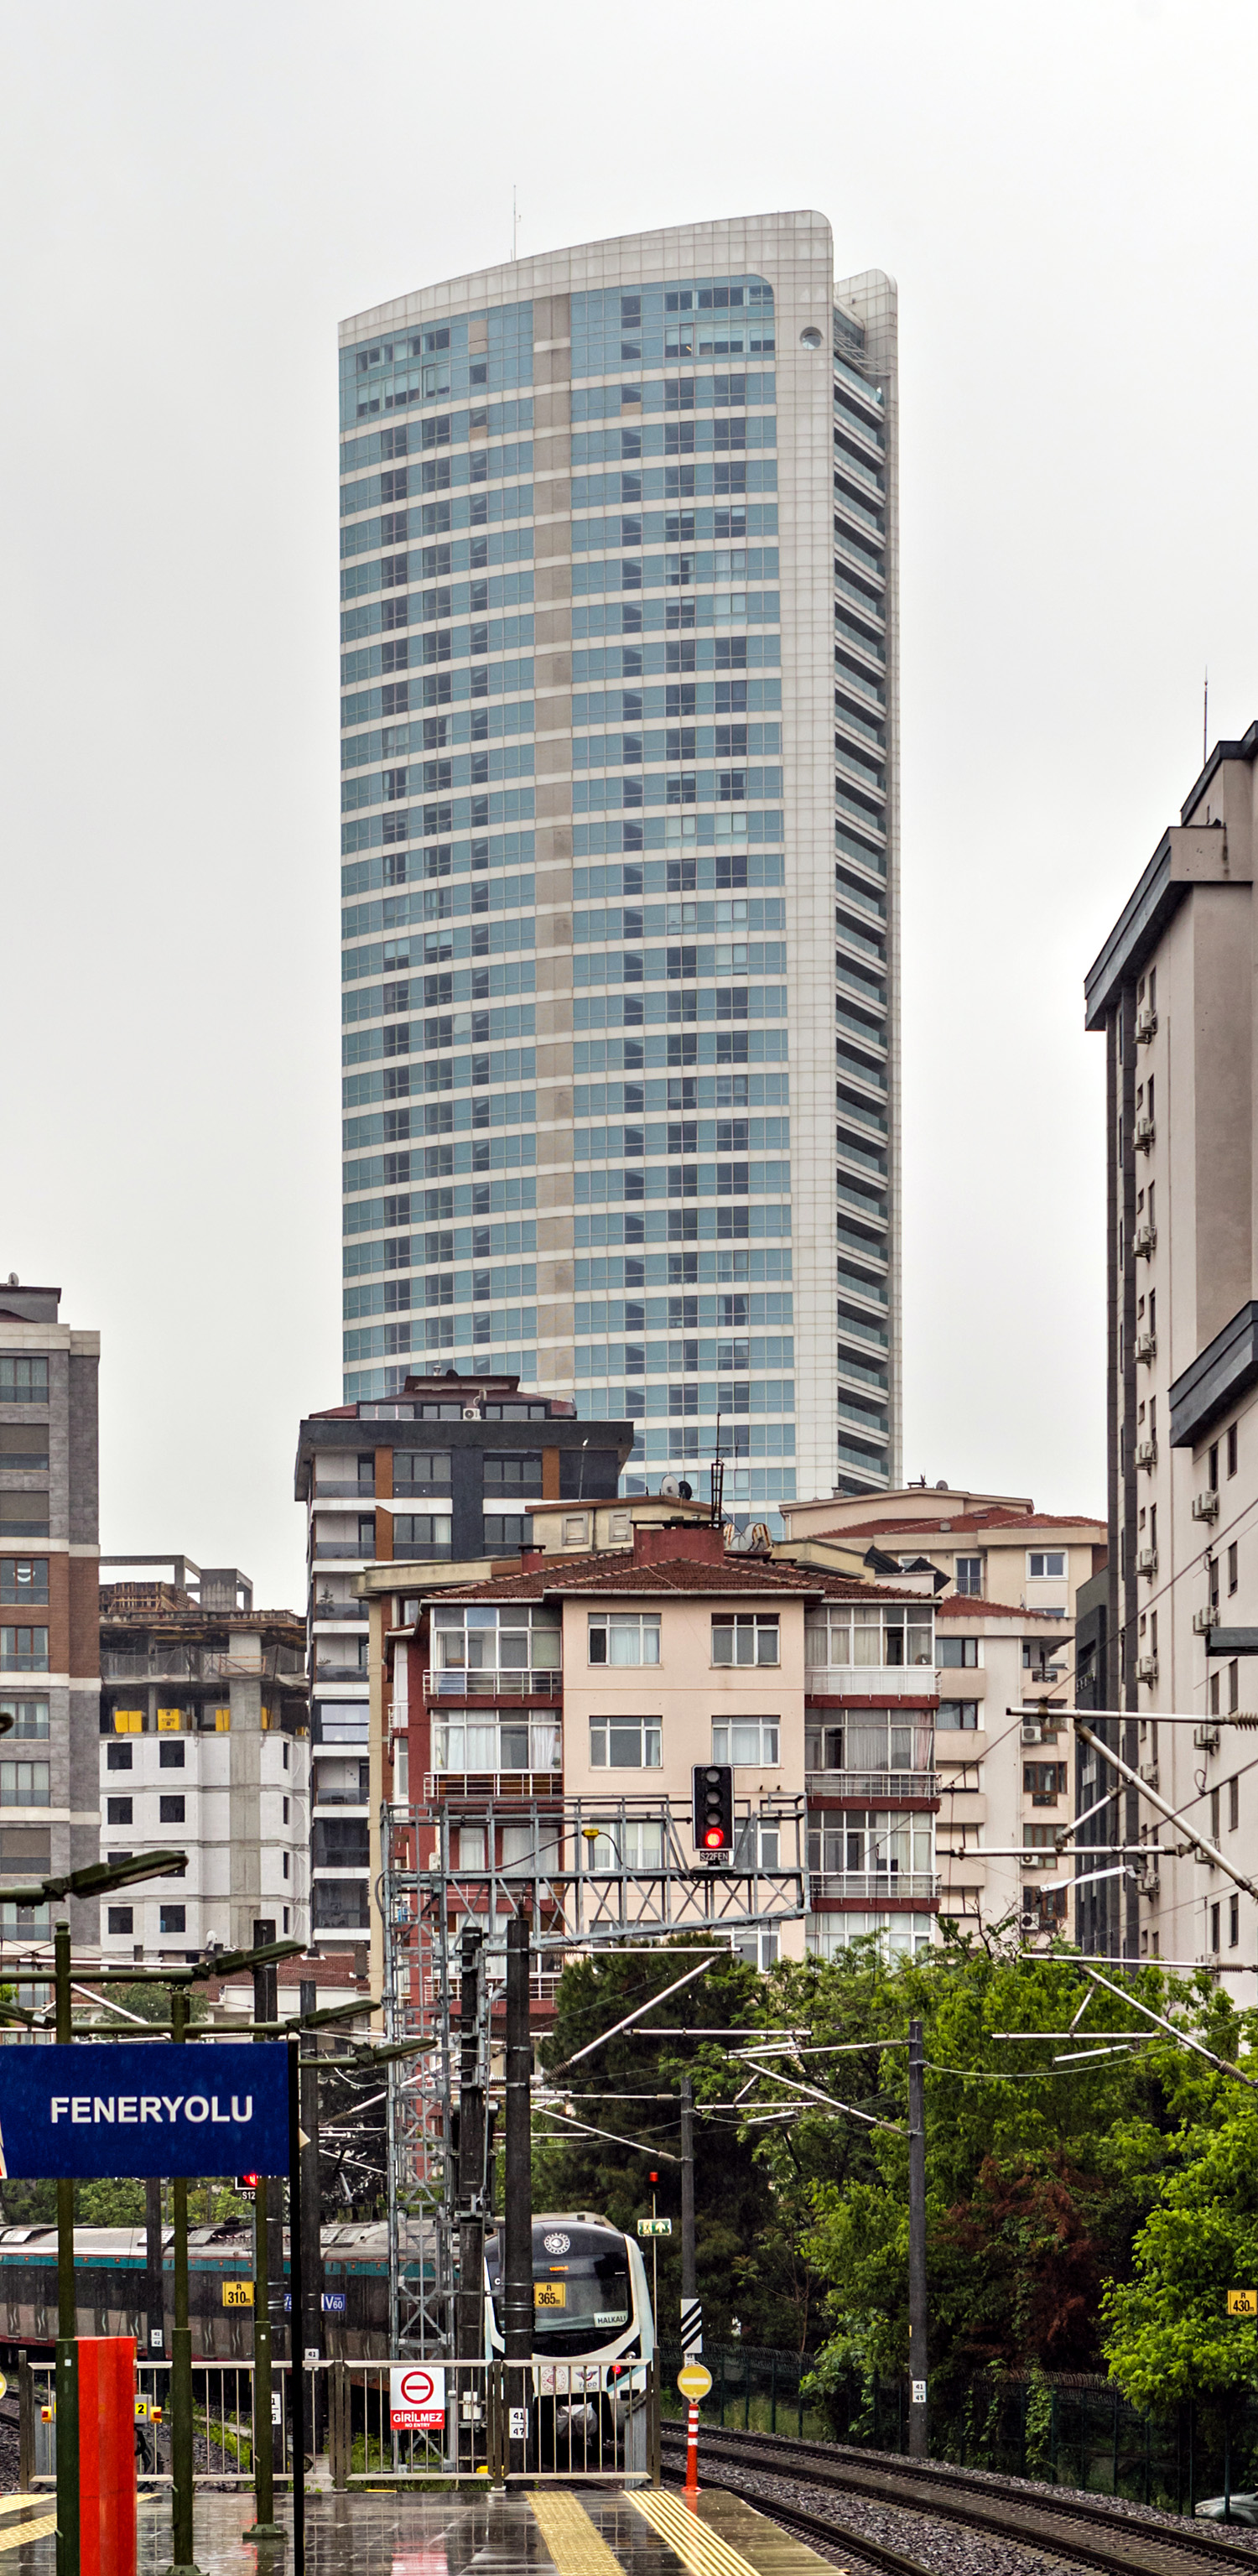 Four Winds Tower C, Istanbul - View from Feneryolu Station. © Mathias Beinling